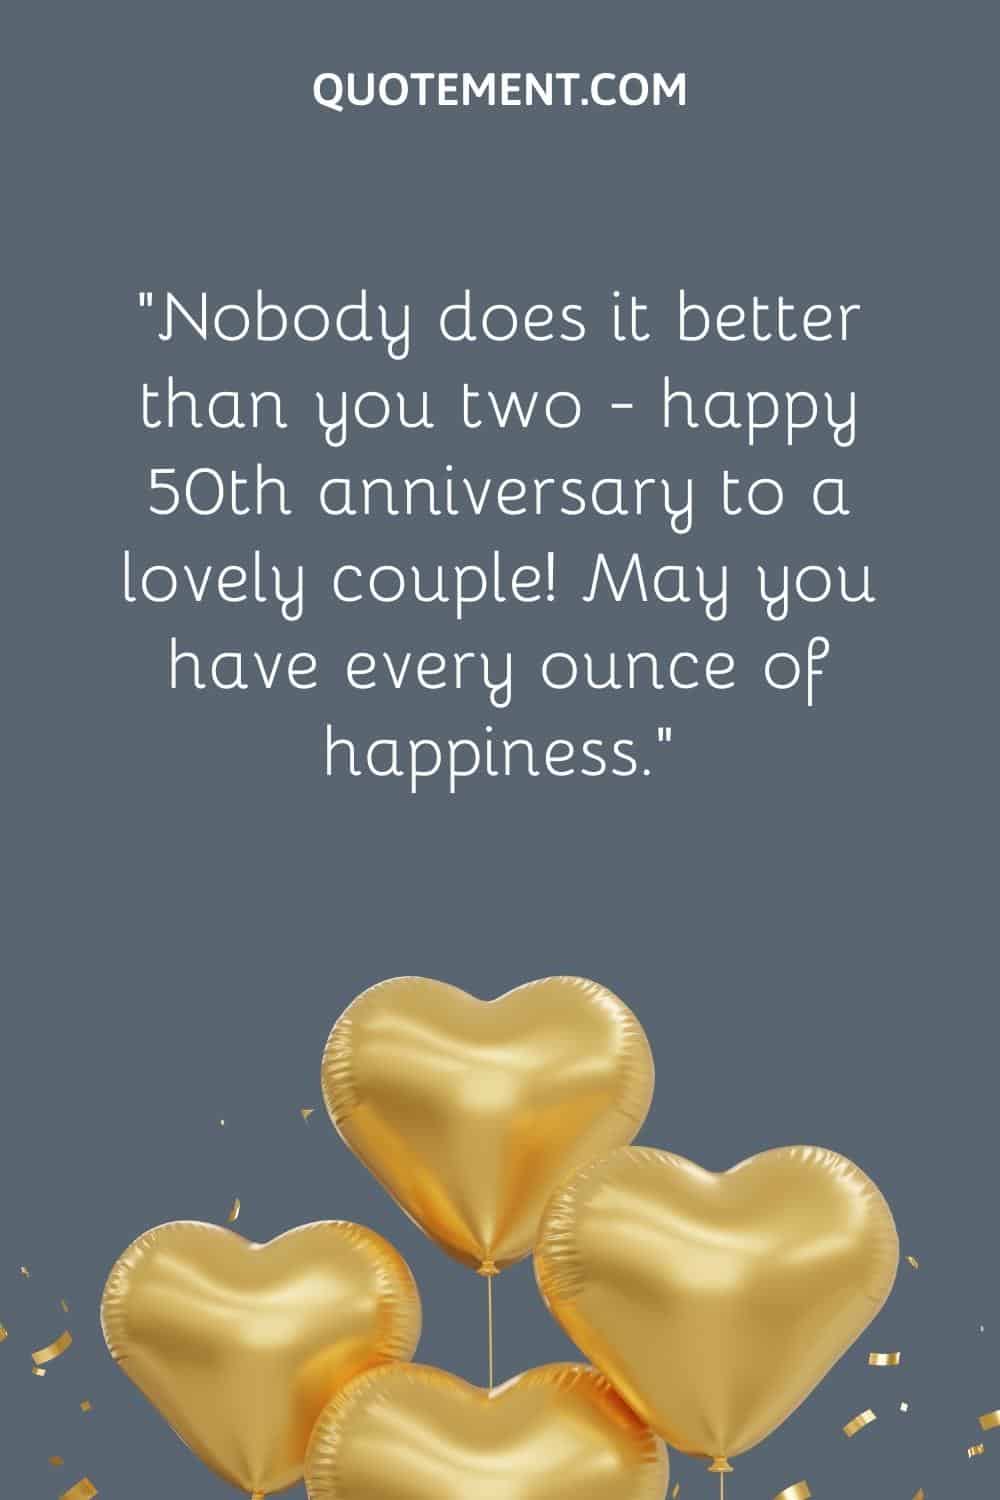 Wishes For 50th anniversary for a sweet & golden couple.